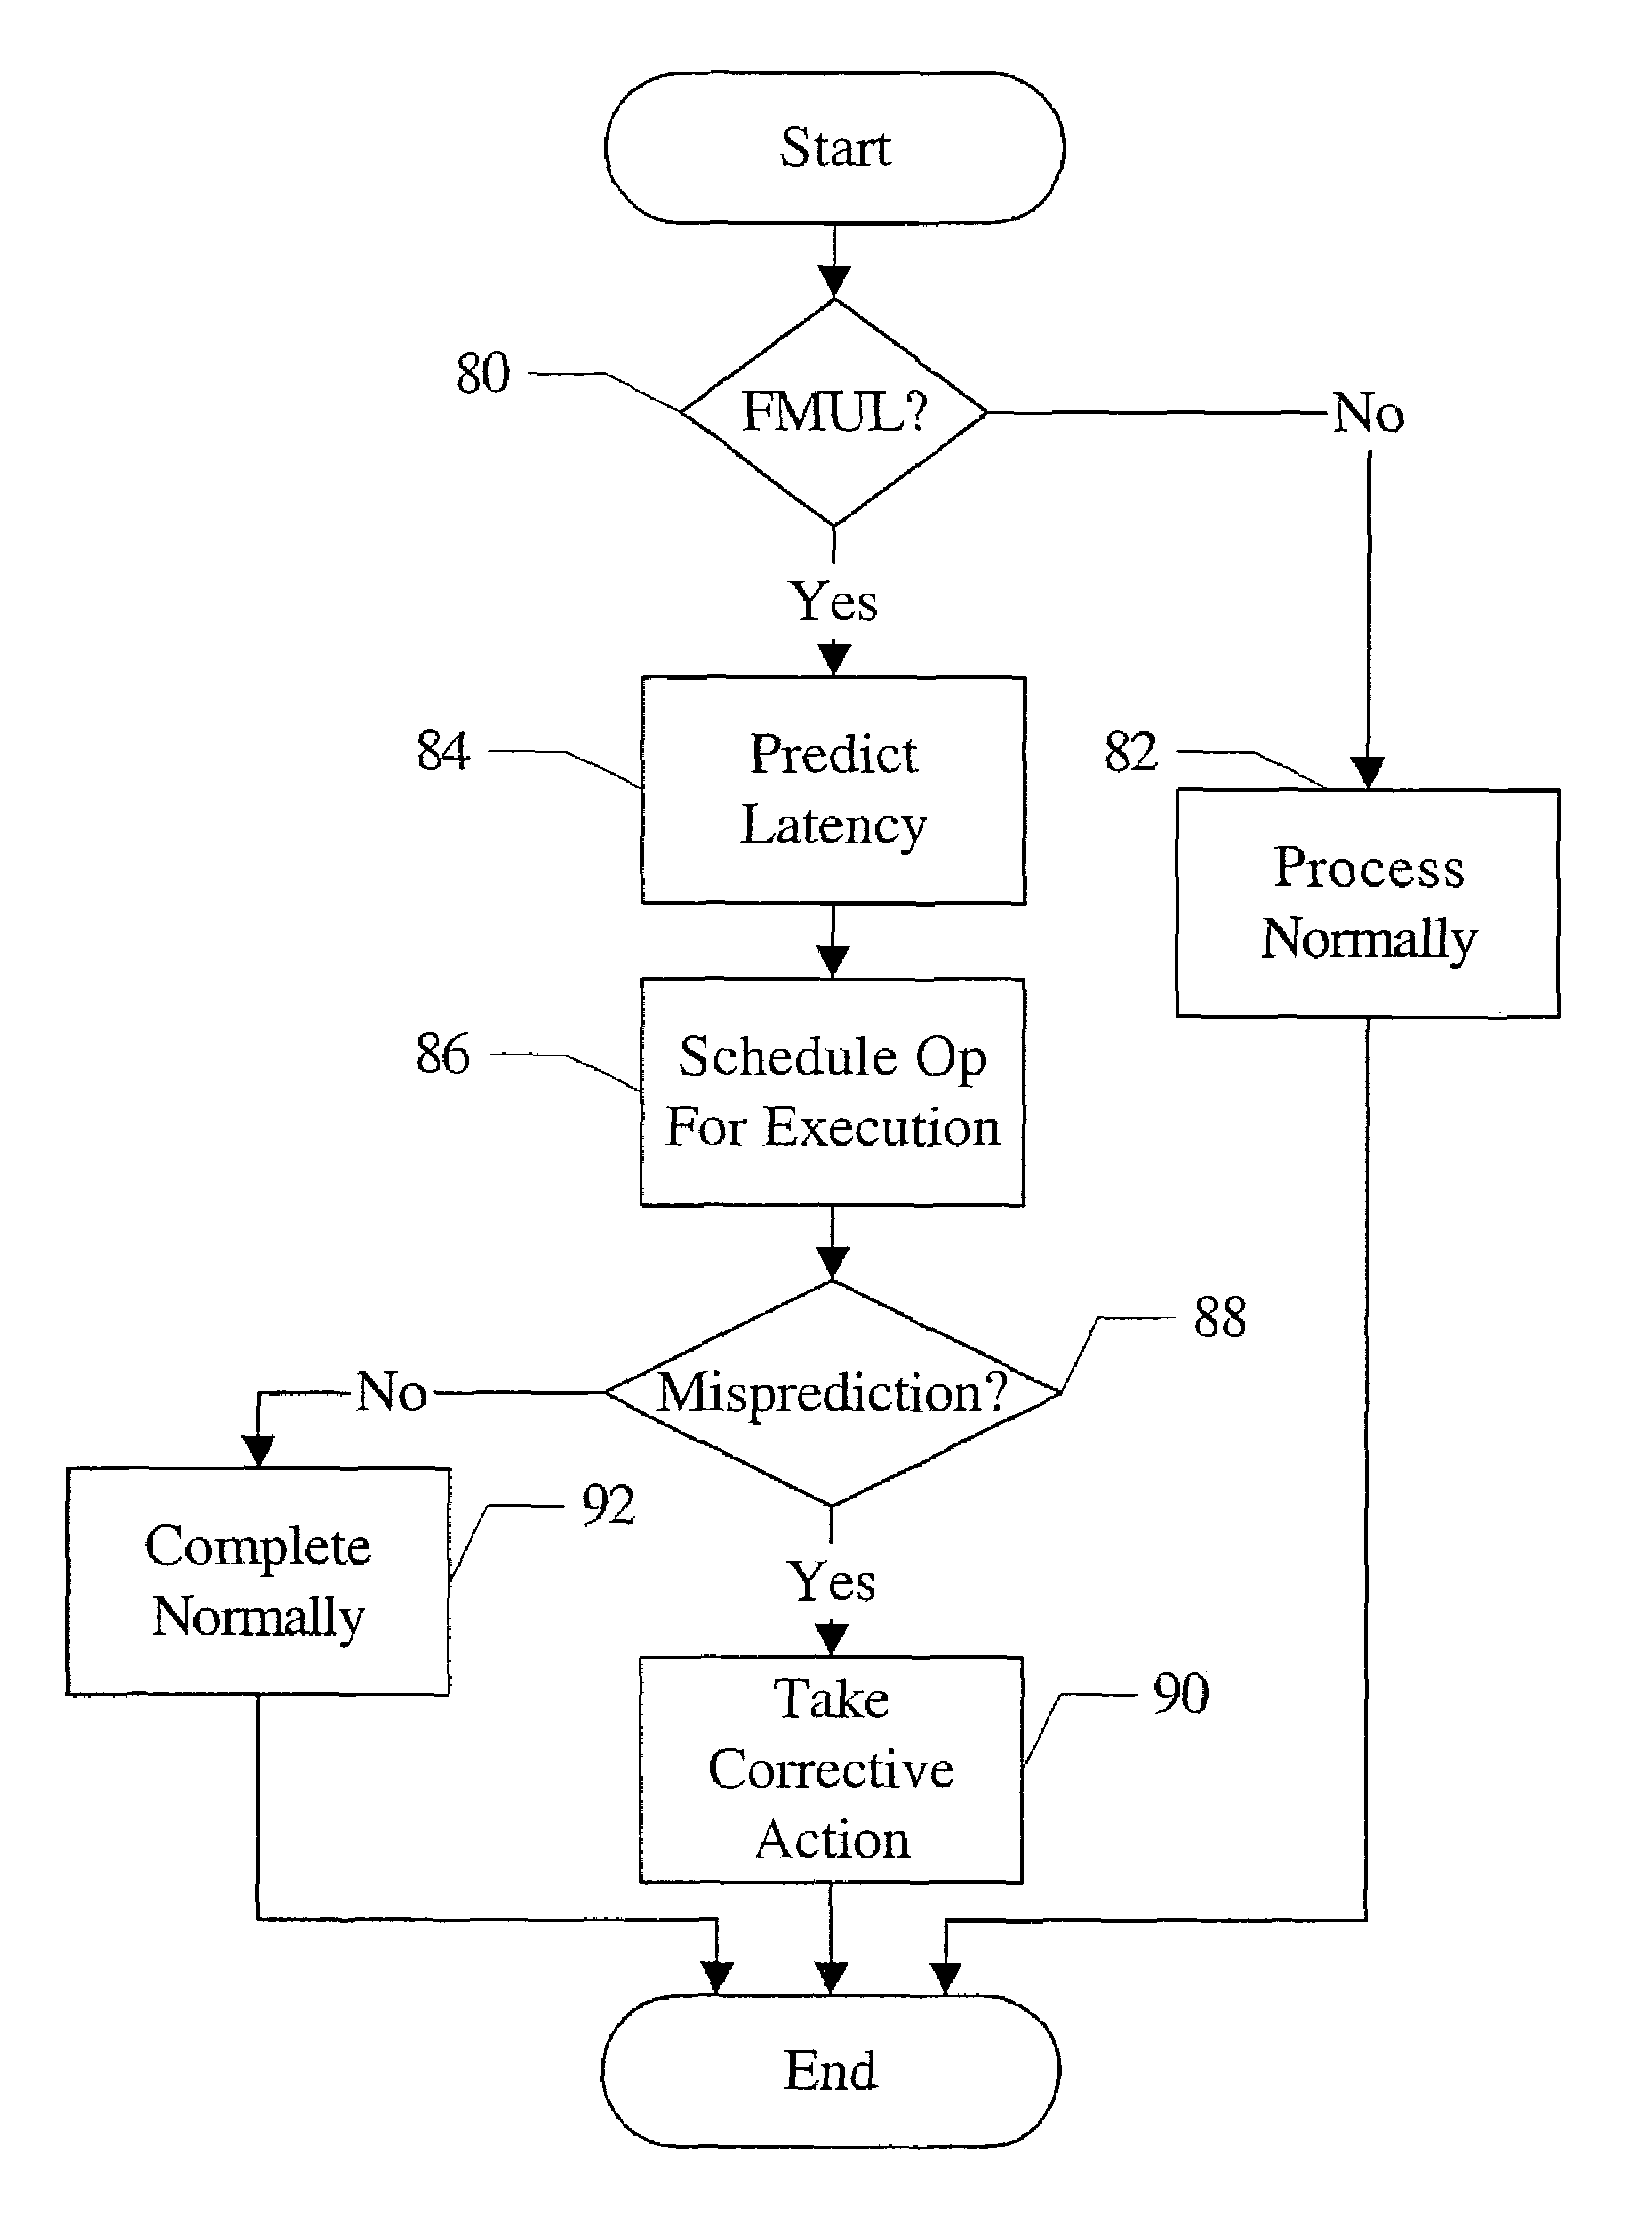 Processor that predicts floating point instruction latency based on predicted precision